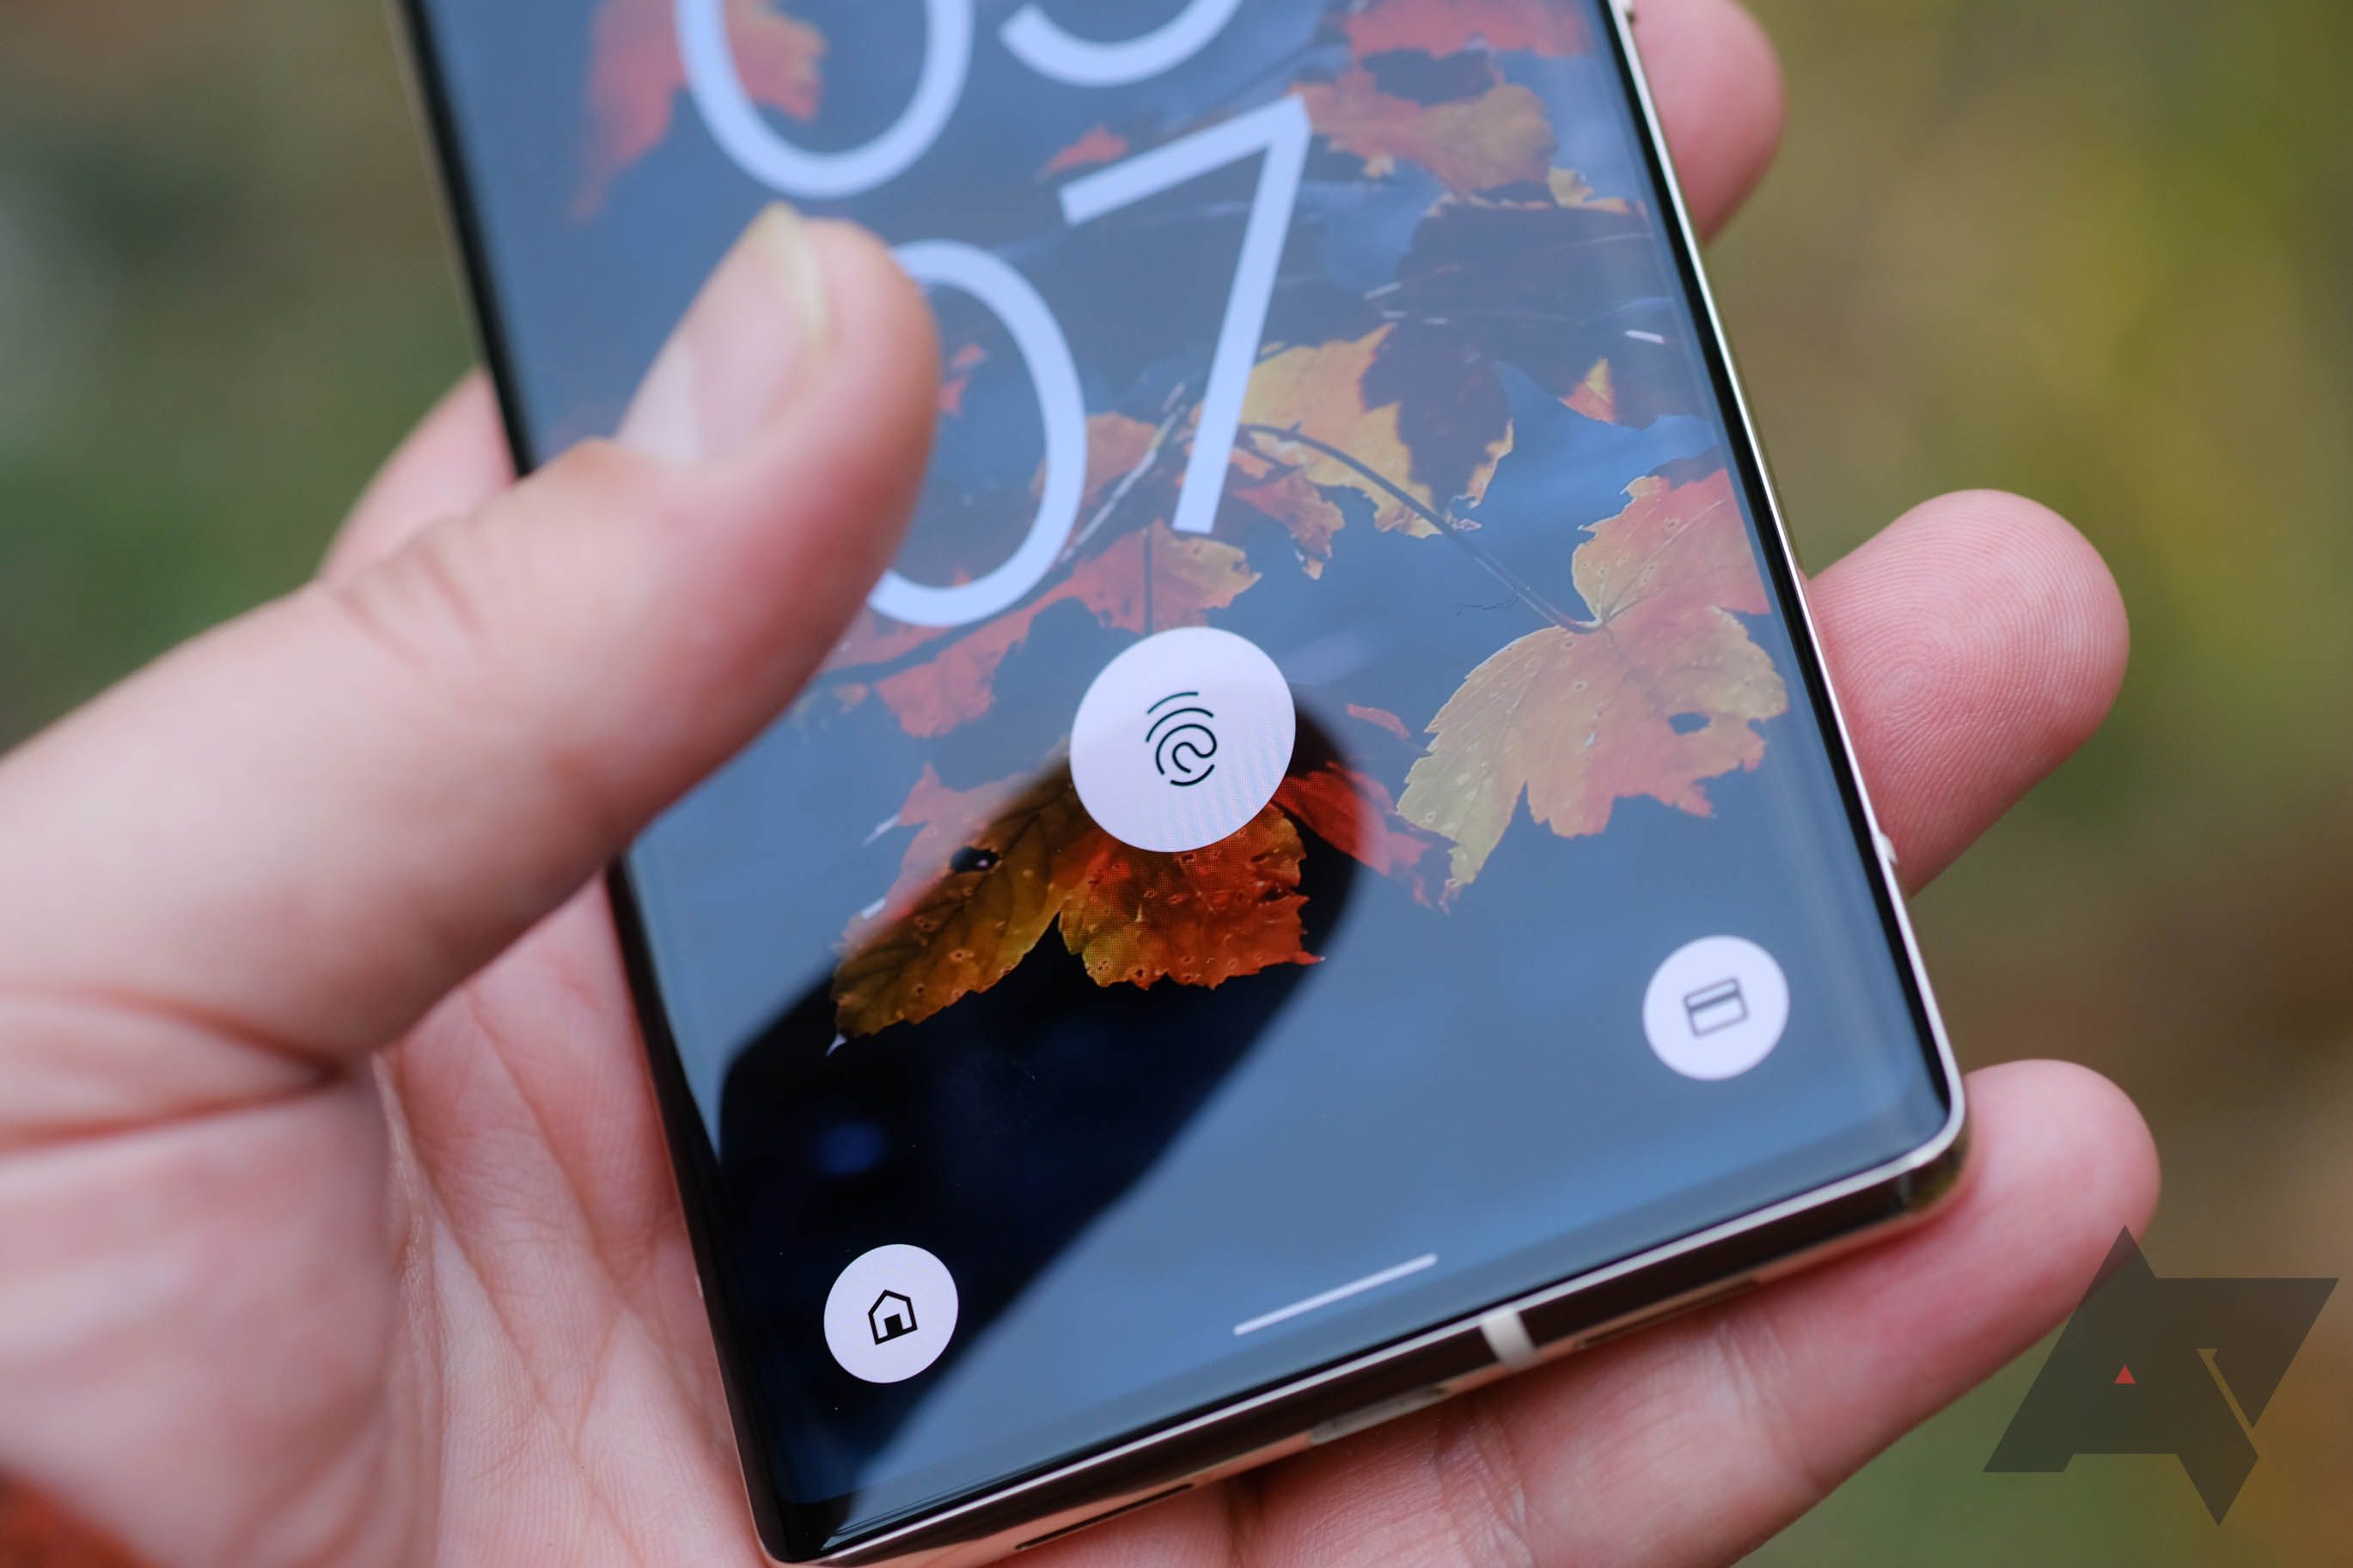 A person holding a Google Pixel phone on its lockscreen with their thumb hovering over the fingerprint sensor. 